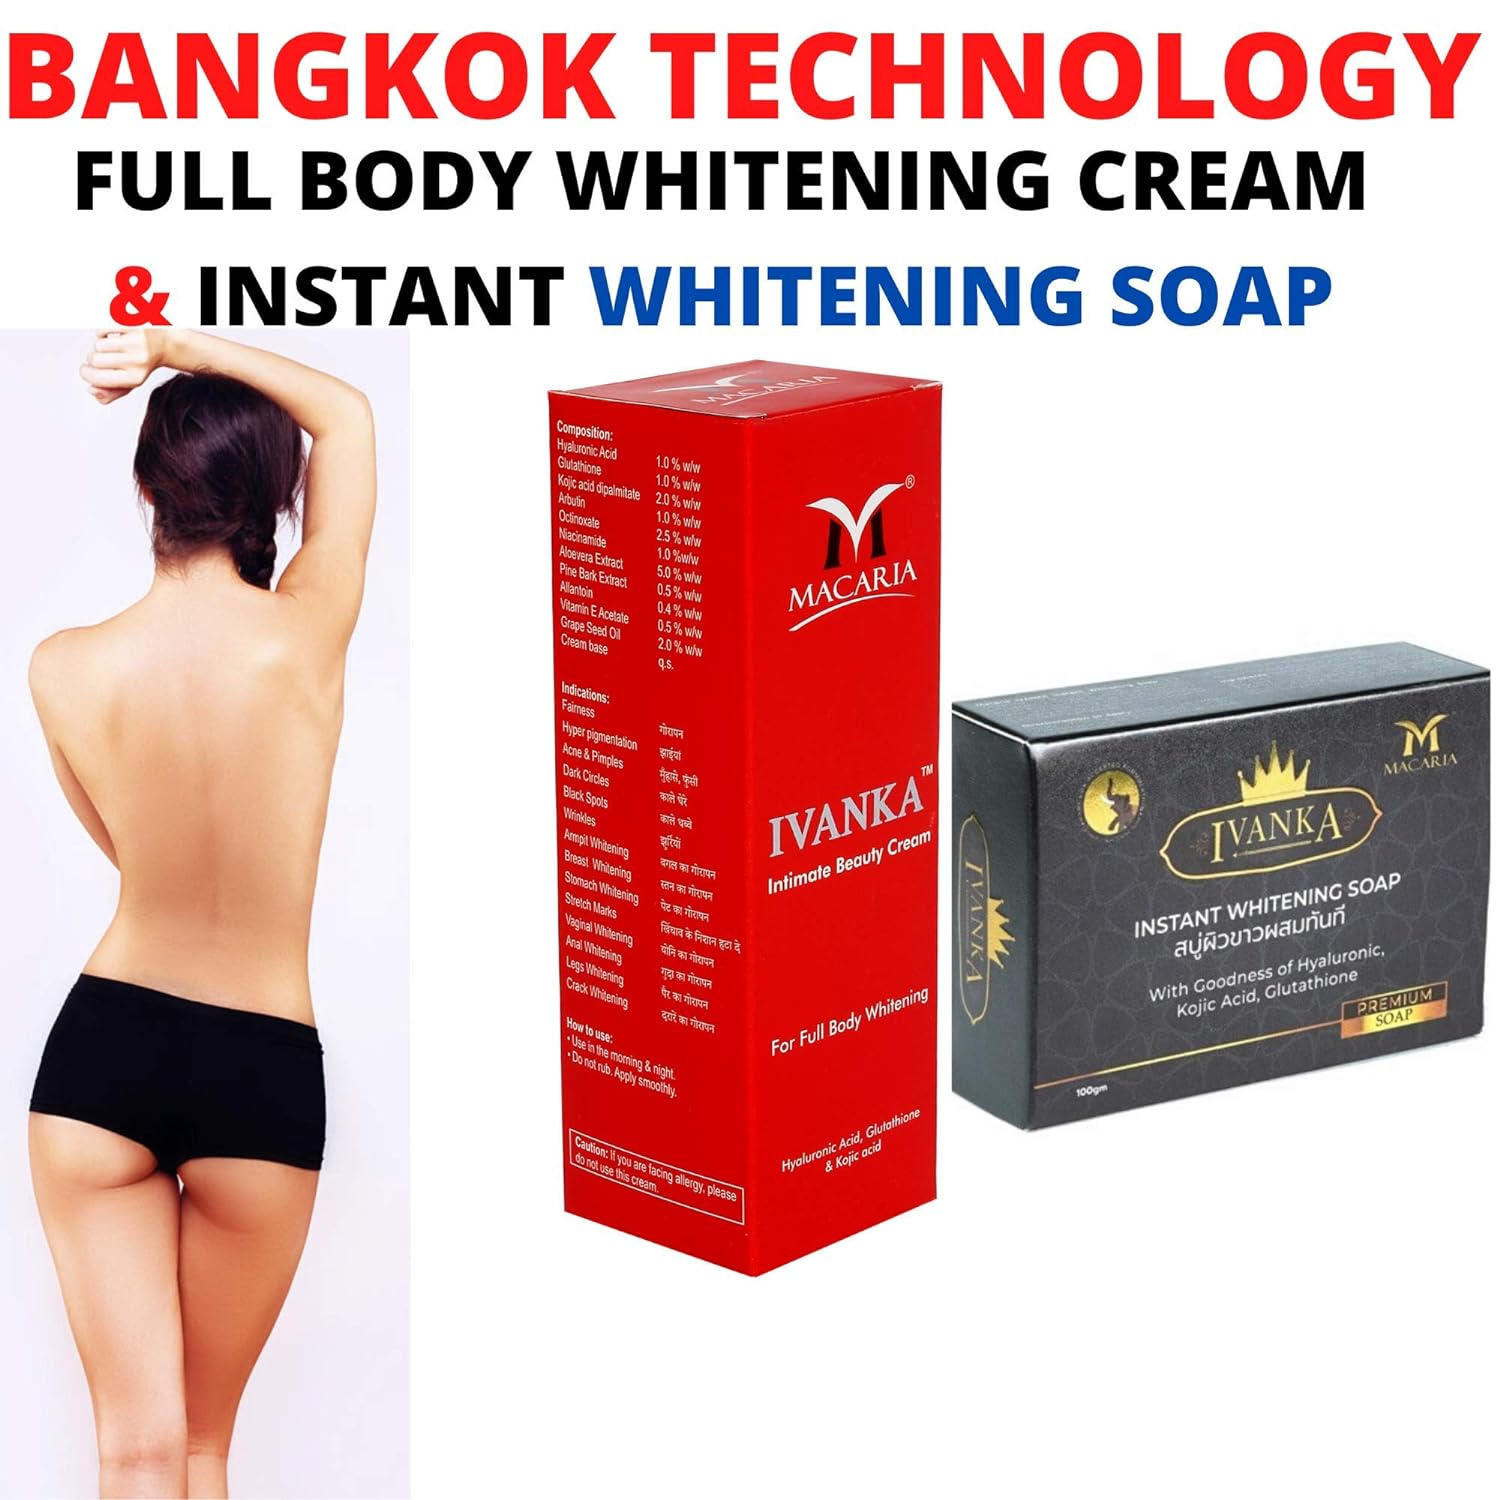 Best Glutathione Soaps For Skin Whitening in 2023: What Are The Top Whitening & Gluta Blend Soaps